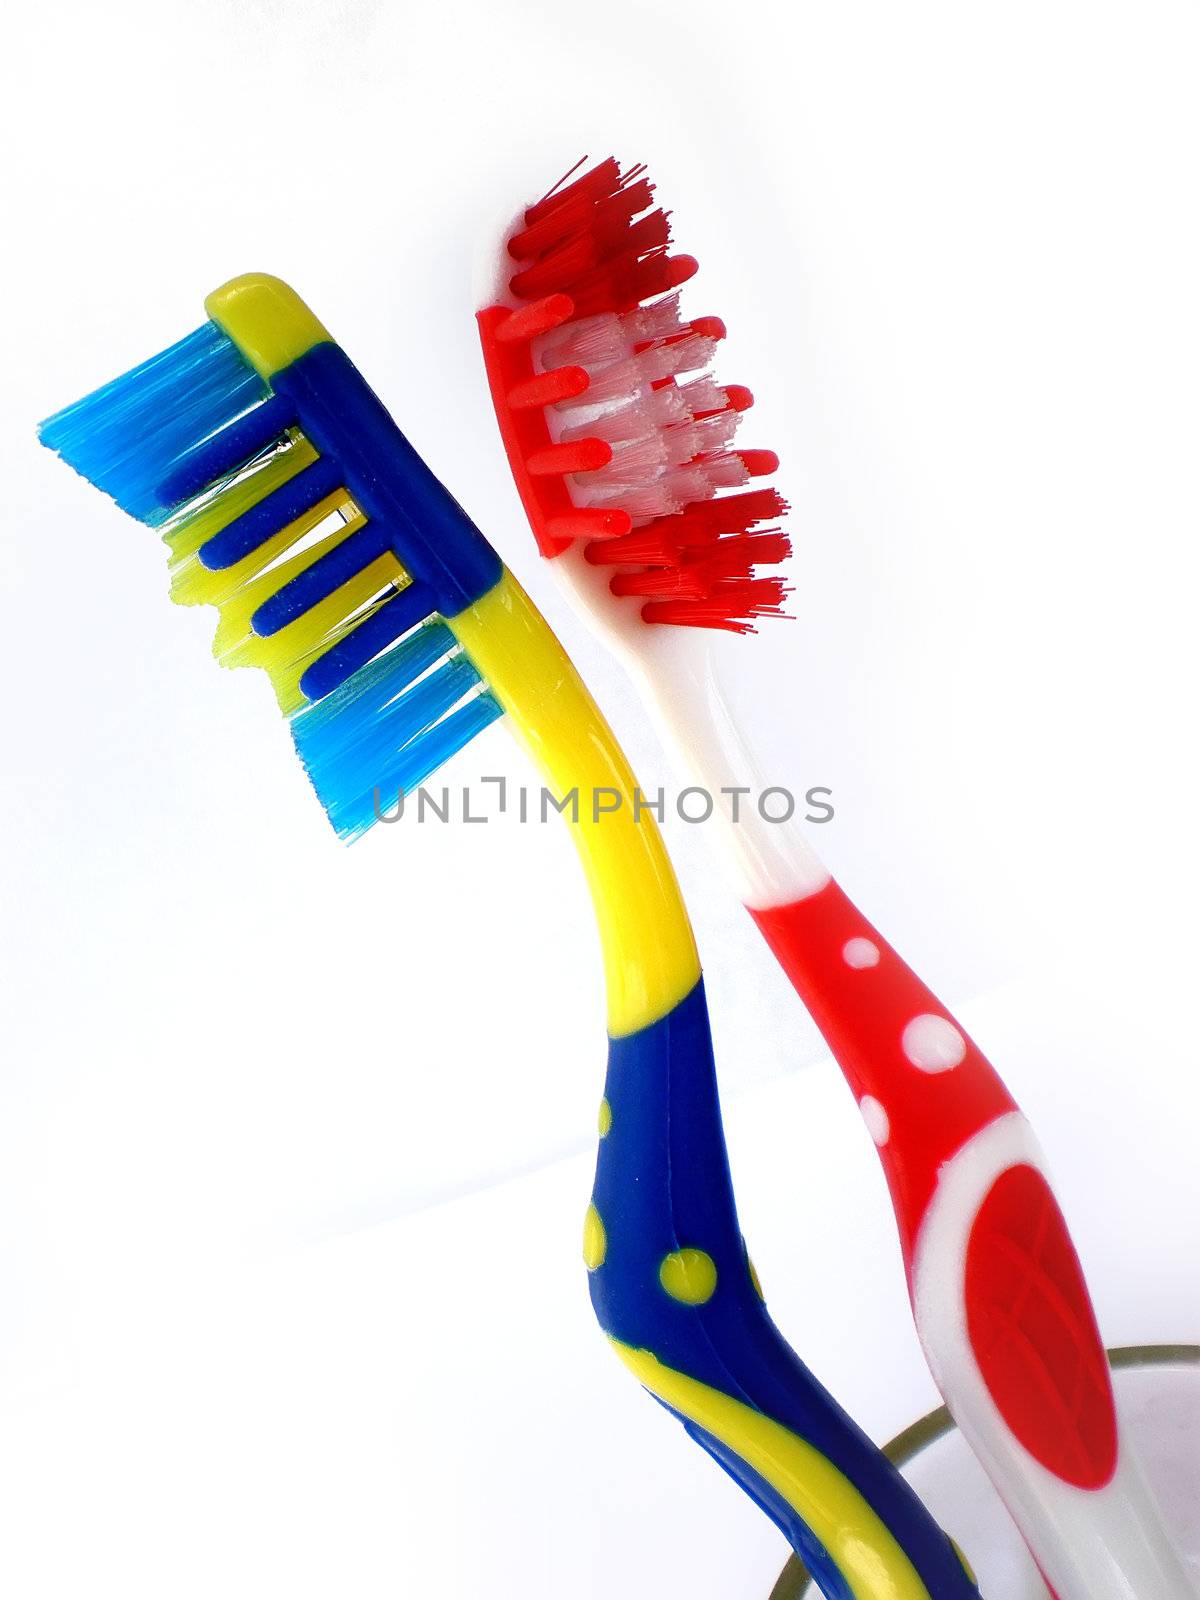 red and blue toothbrushes isolated on white background